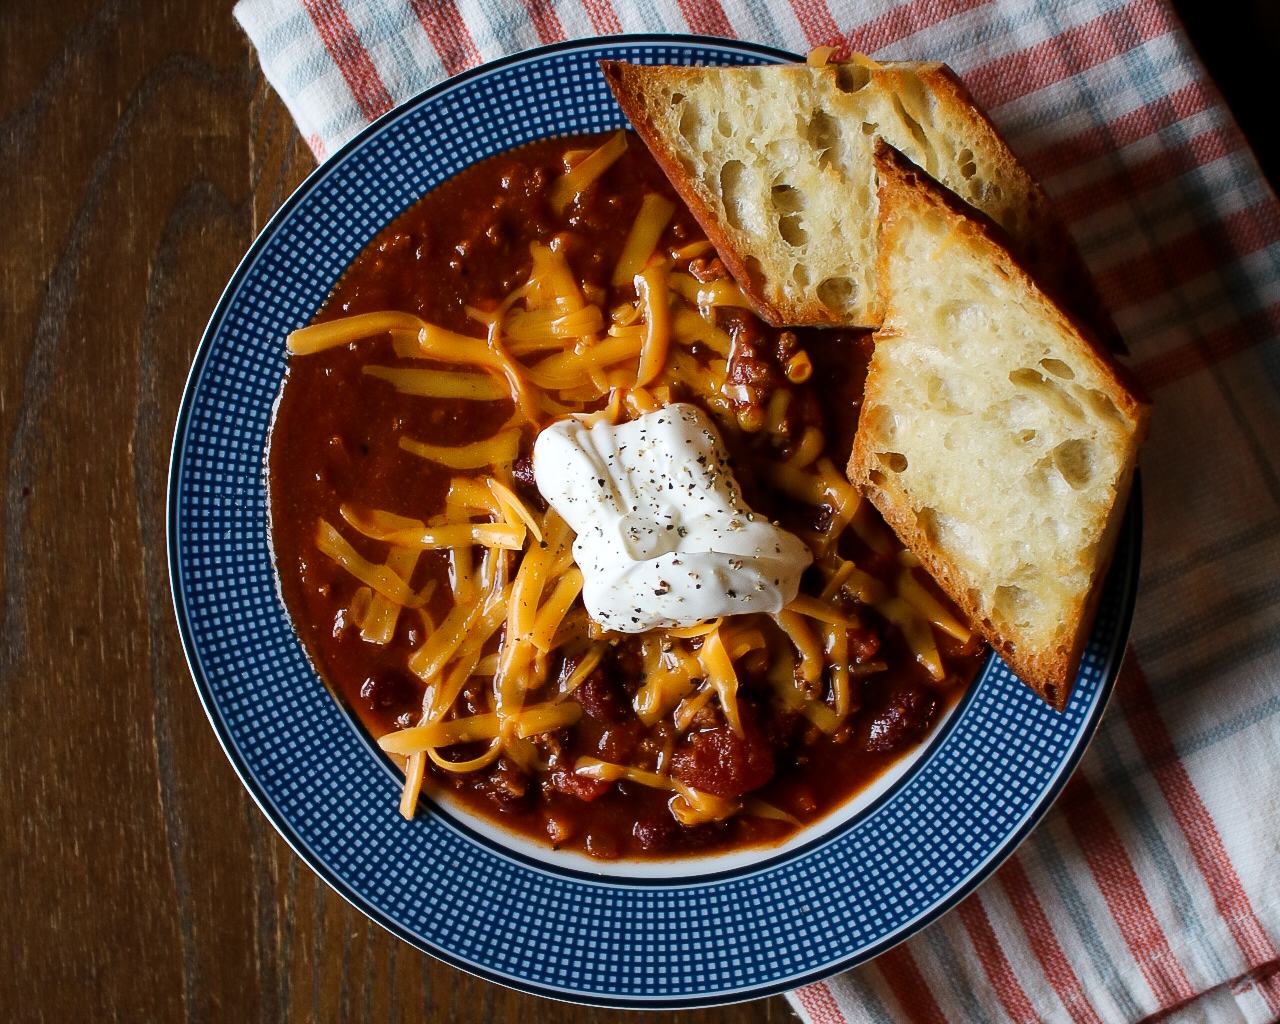 easy, tasty chili recipe - bowl of chili topped with shredded cheese, sour cream and buttered bread.